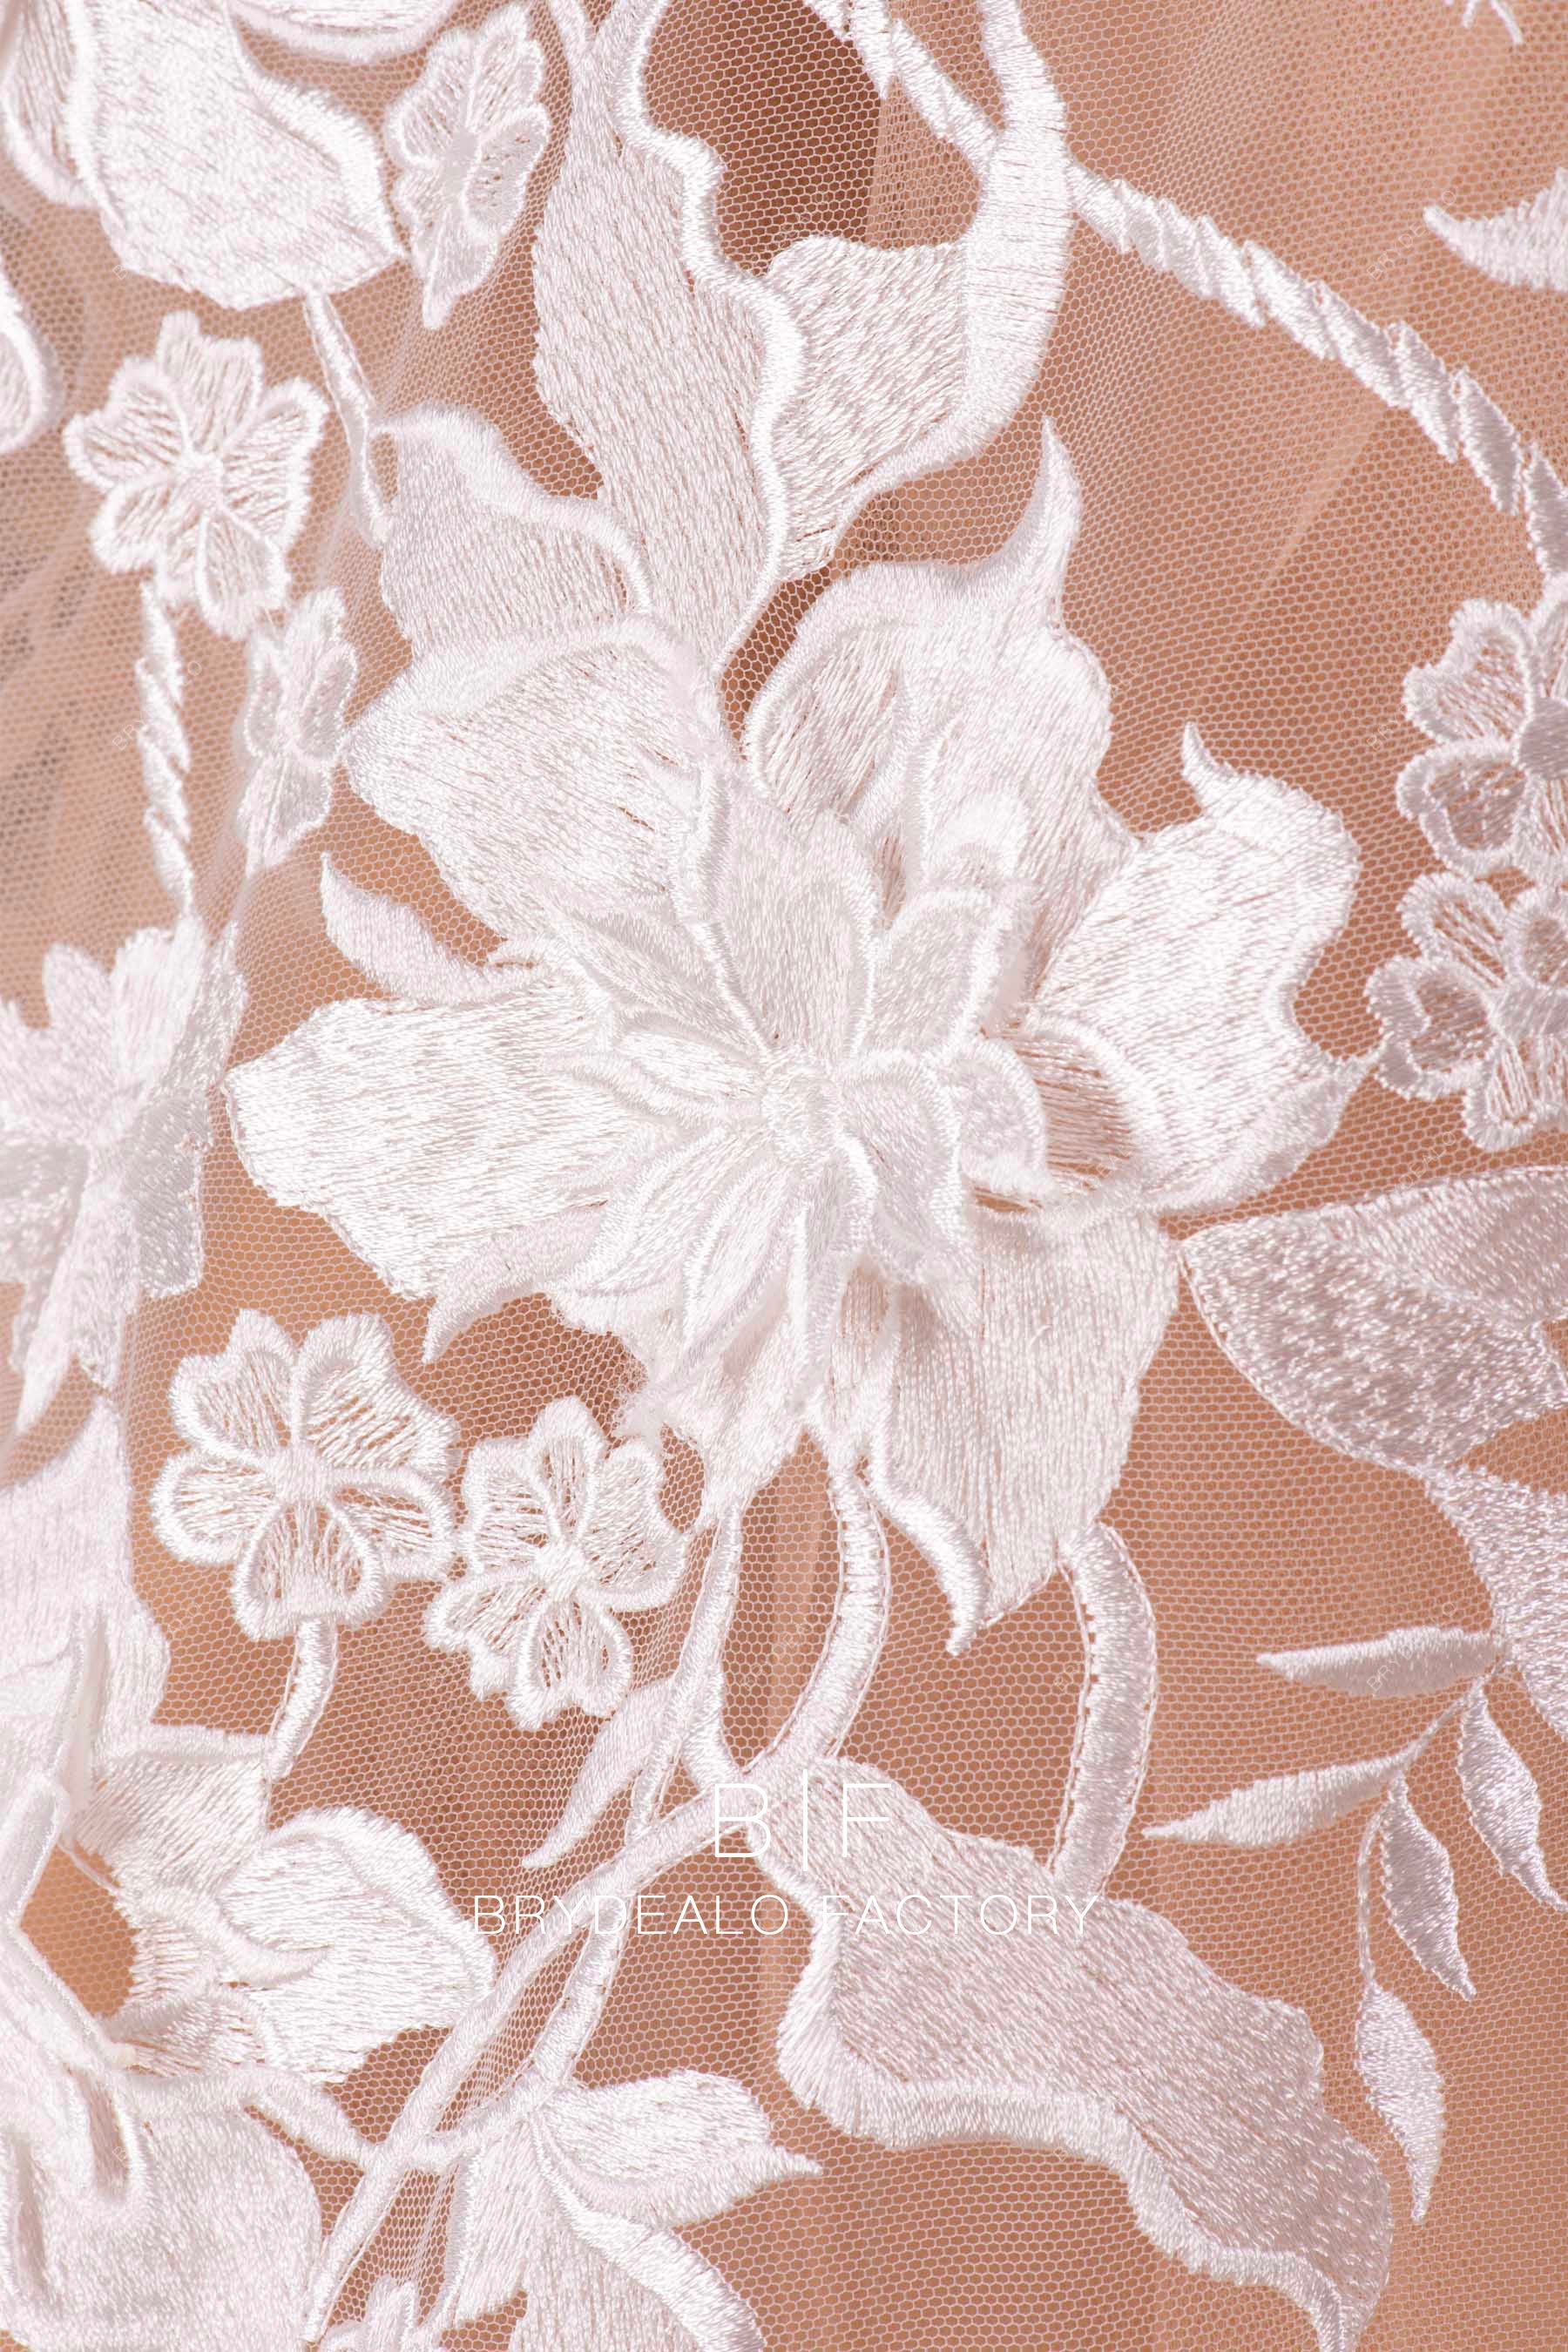 3D flower embroidery lace online